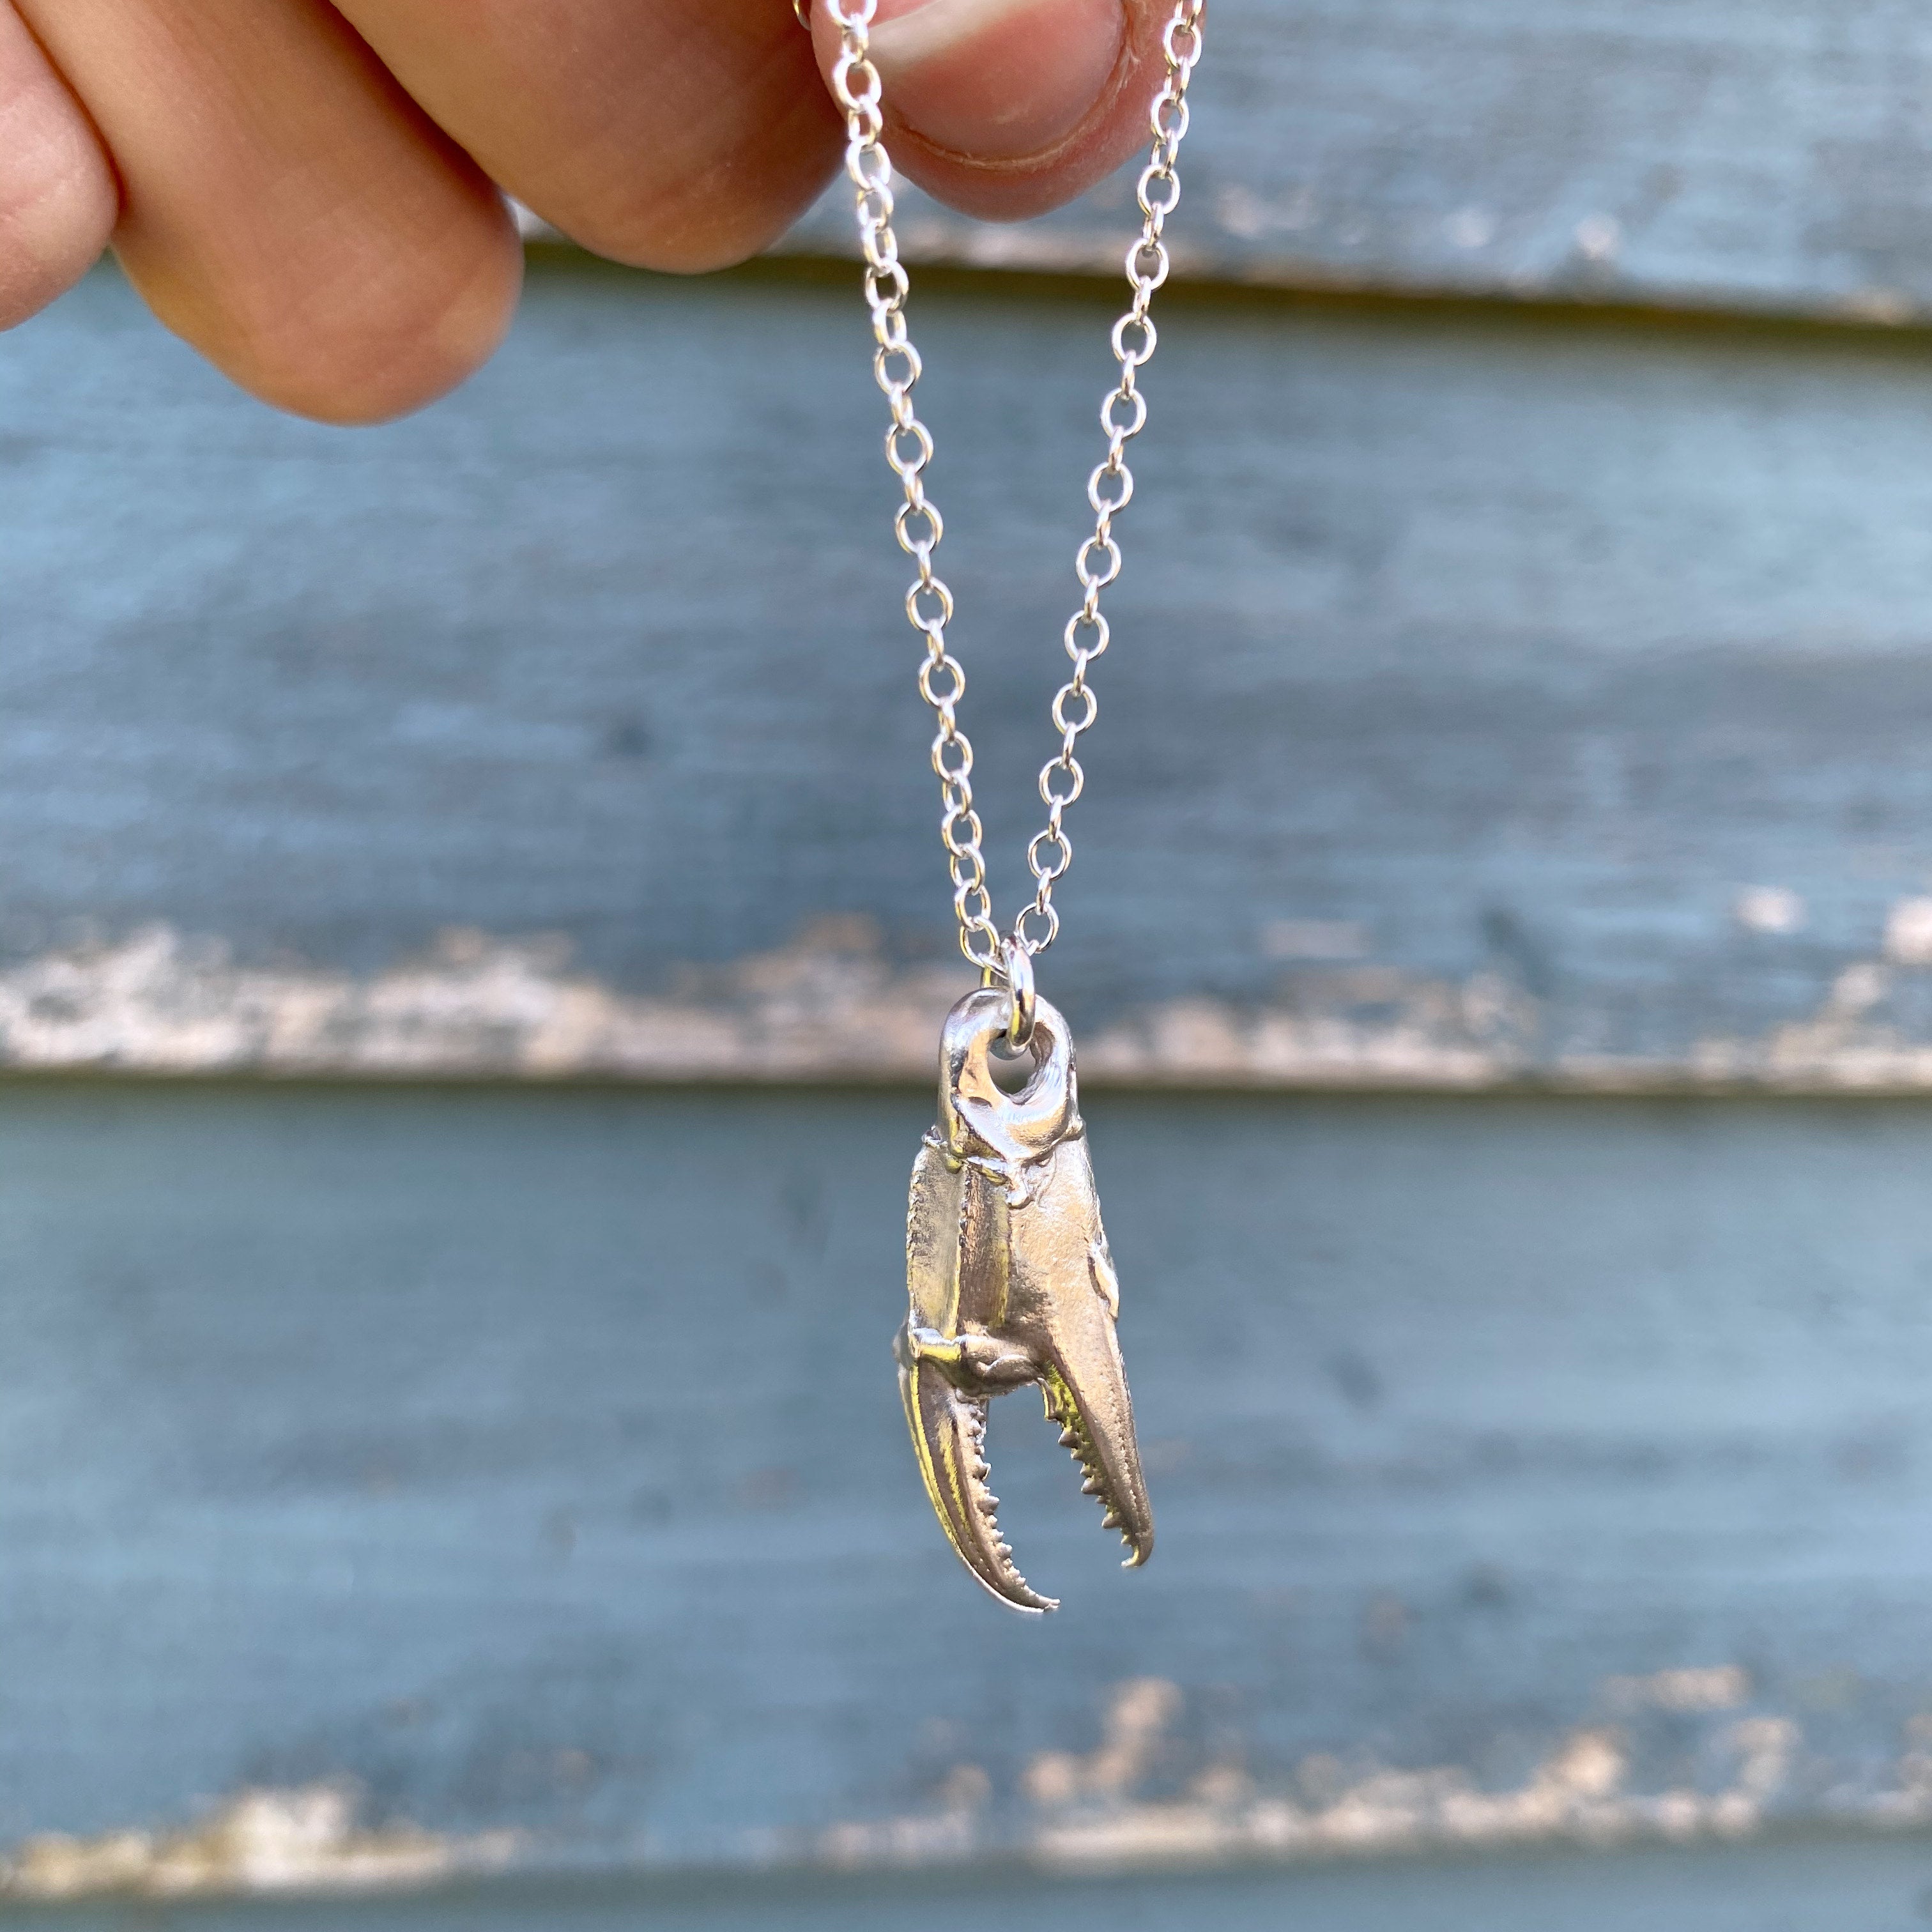 Stone Crab Claw Jewelry...Pendants, Necklaces, Ear Rings, Key Chains -  jewelry - by owner - sale - craigslist